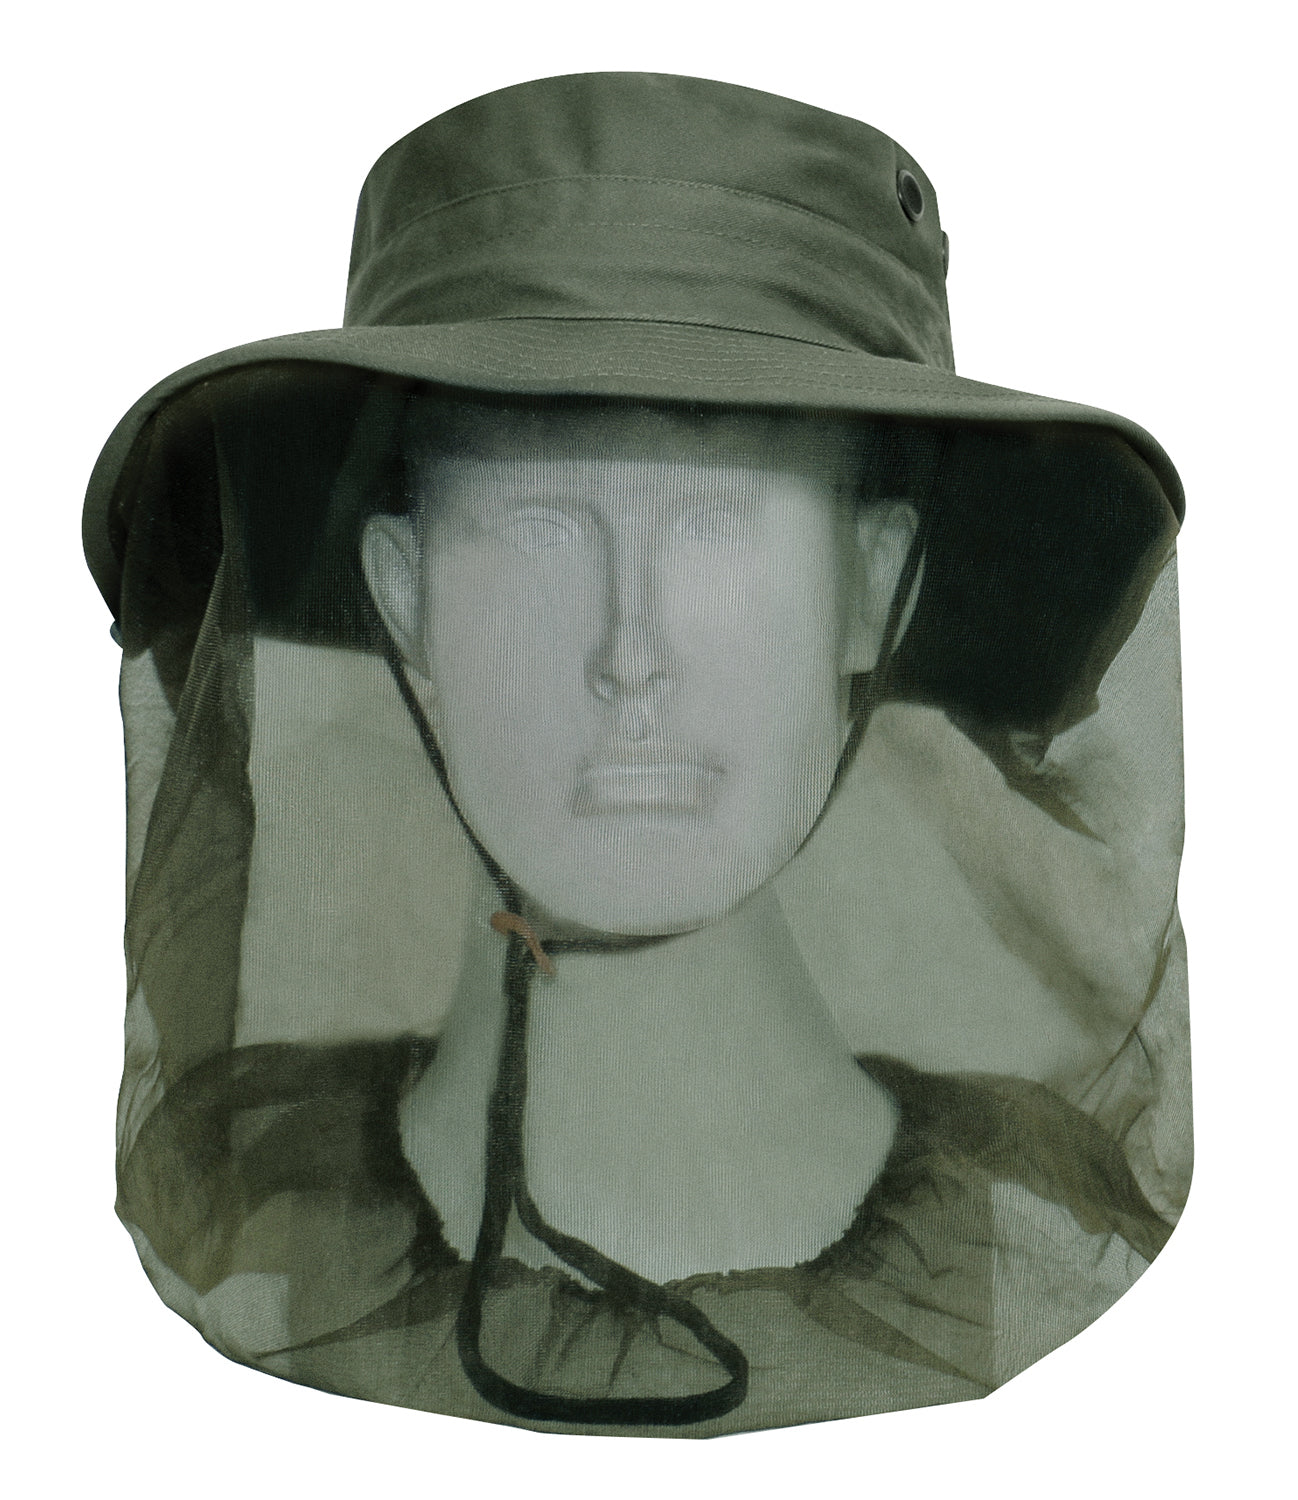 Adjustable Boonie Hat With Mosquito Netting - Olive Drab